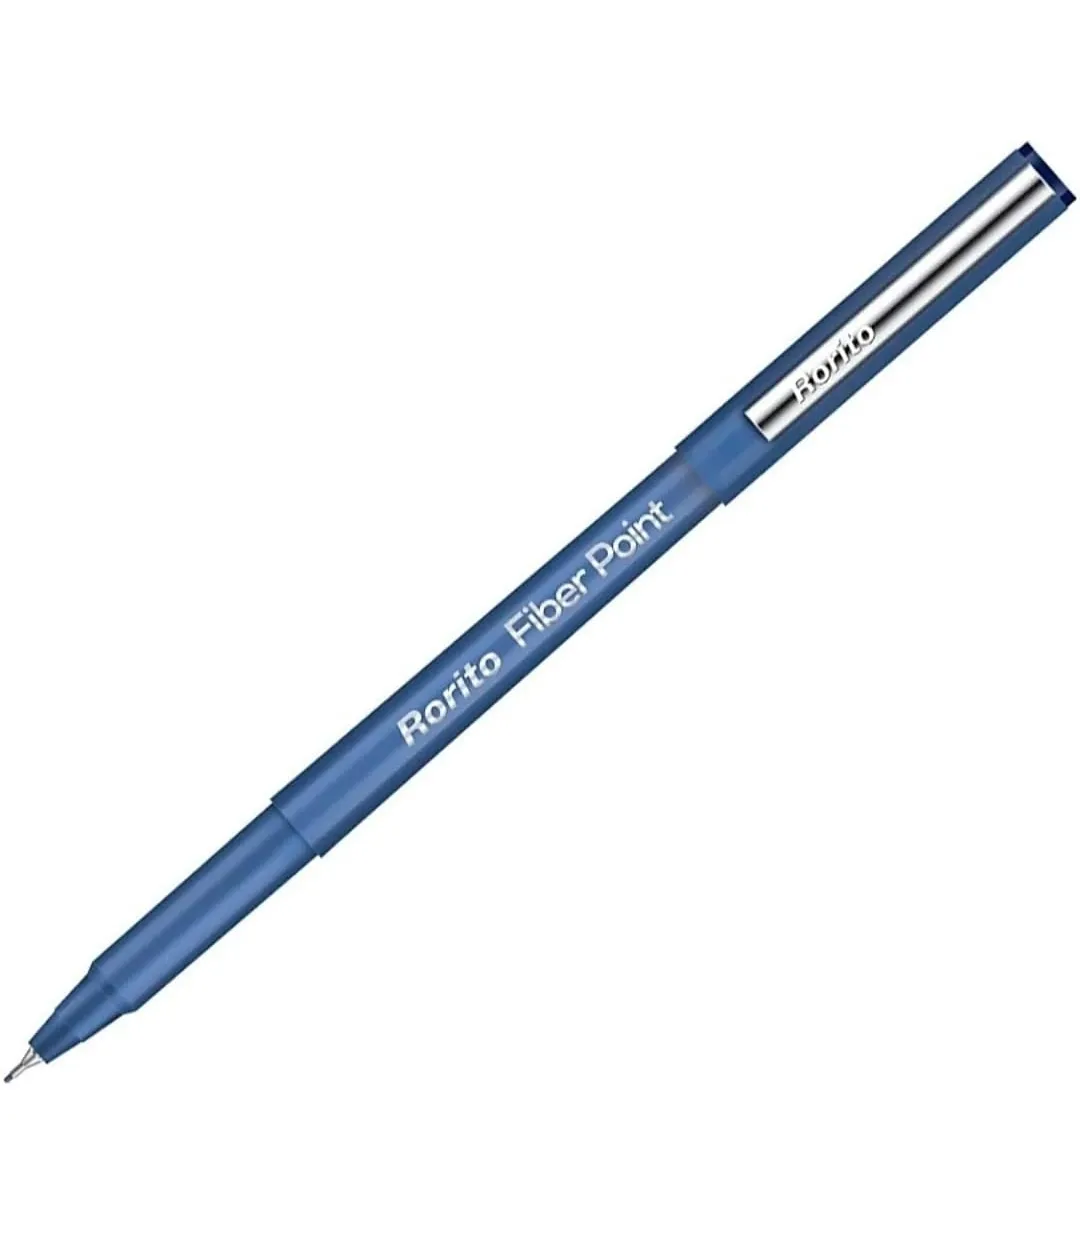 RORITO FIBERPOINT Colours Pen (Pack of 10)